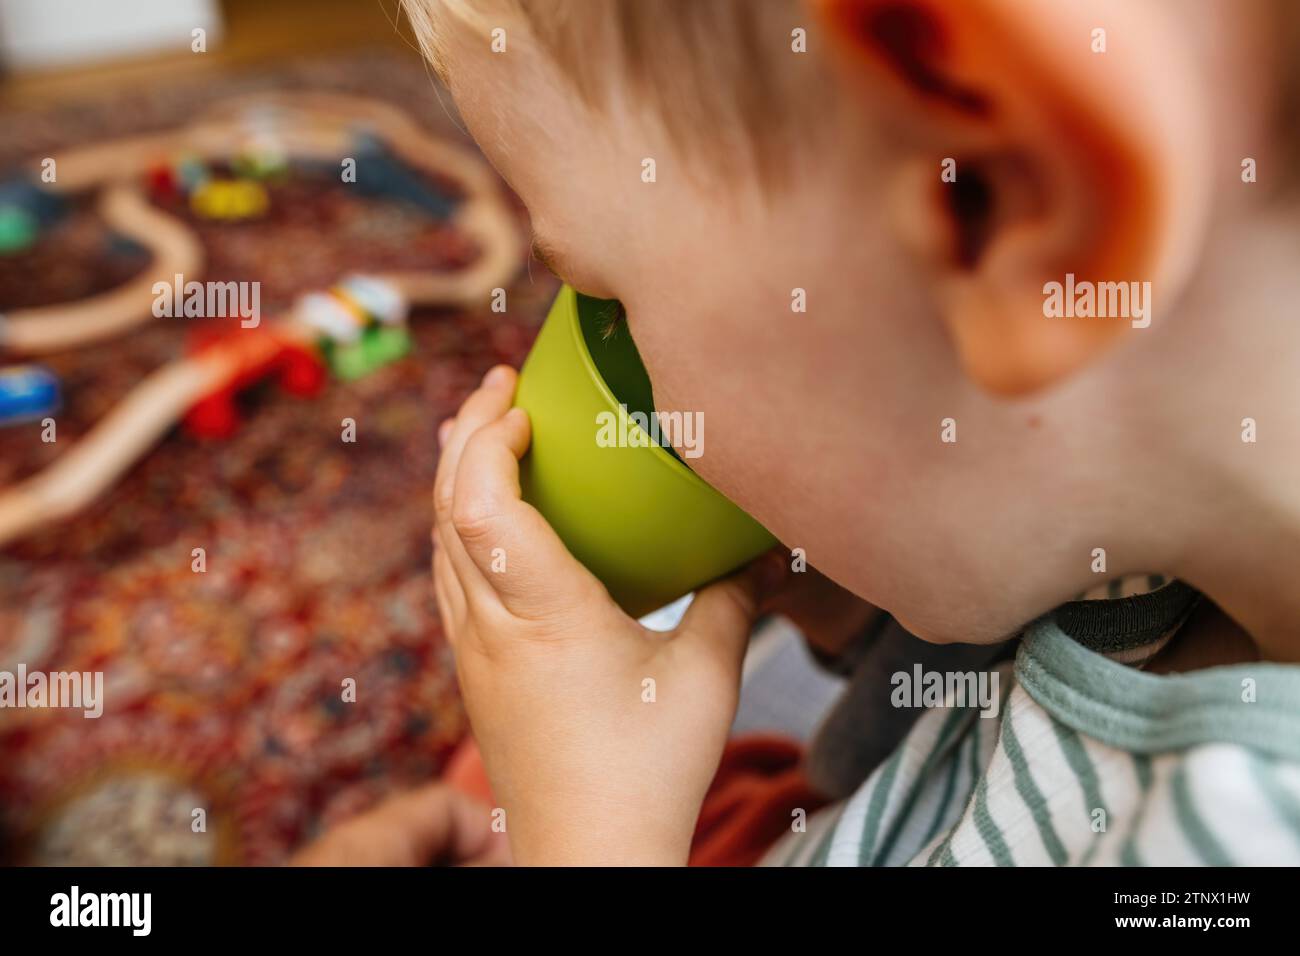 Toddler drinking fresh, clean water from his new plastic green cup, symbolizing healthy habits Stock Photo